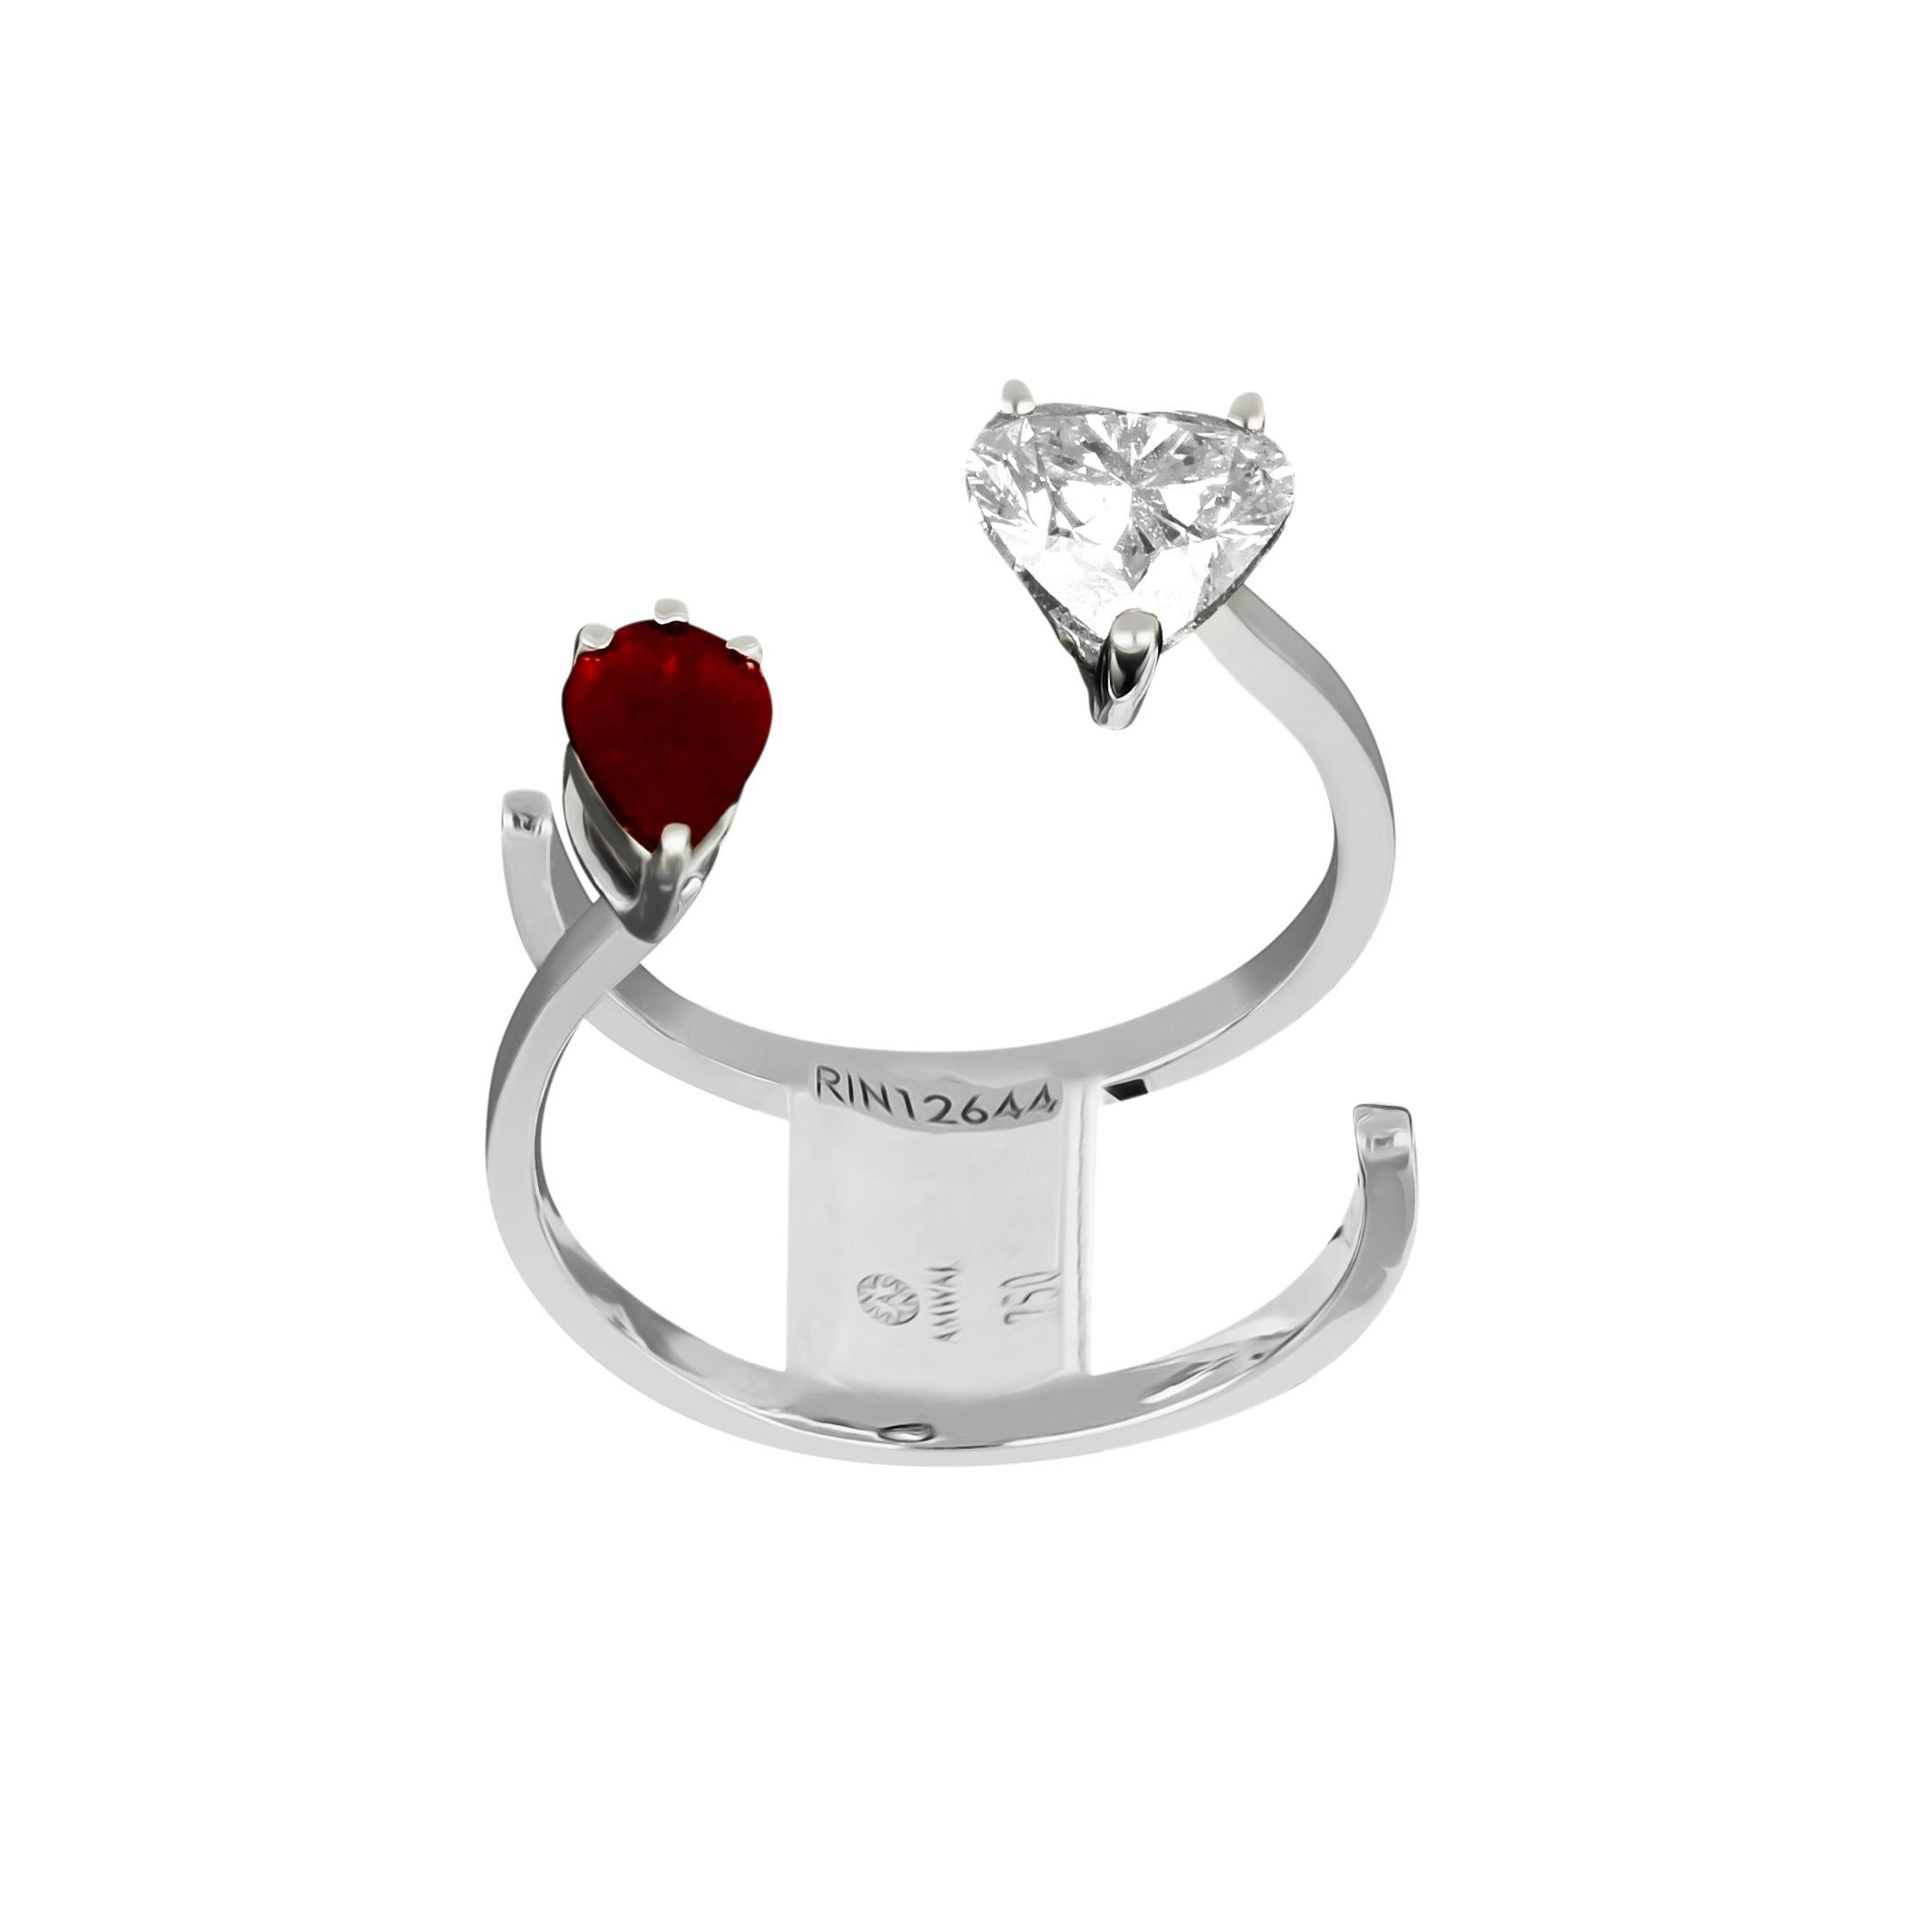 A Classic Beauty, this 18 karat white gold ring by Amwaj jewellery presents the lovers’ promise of a future together featuring heart shape diamond that sit ever so beautifully and is enhanced by the pear ruby.
Diamonds (Total Carat Weight: 0.91 ct)